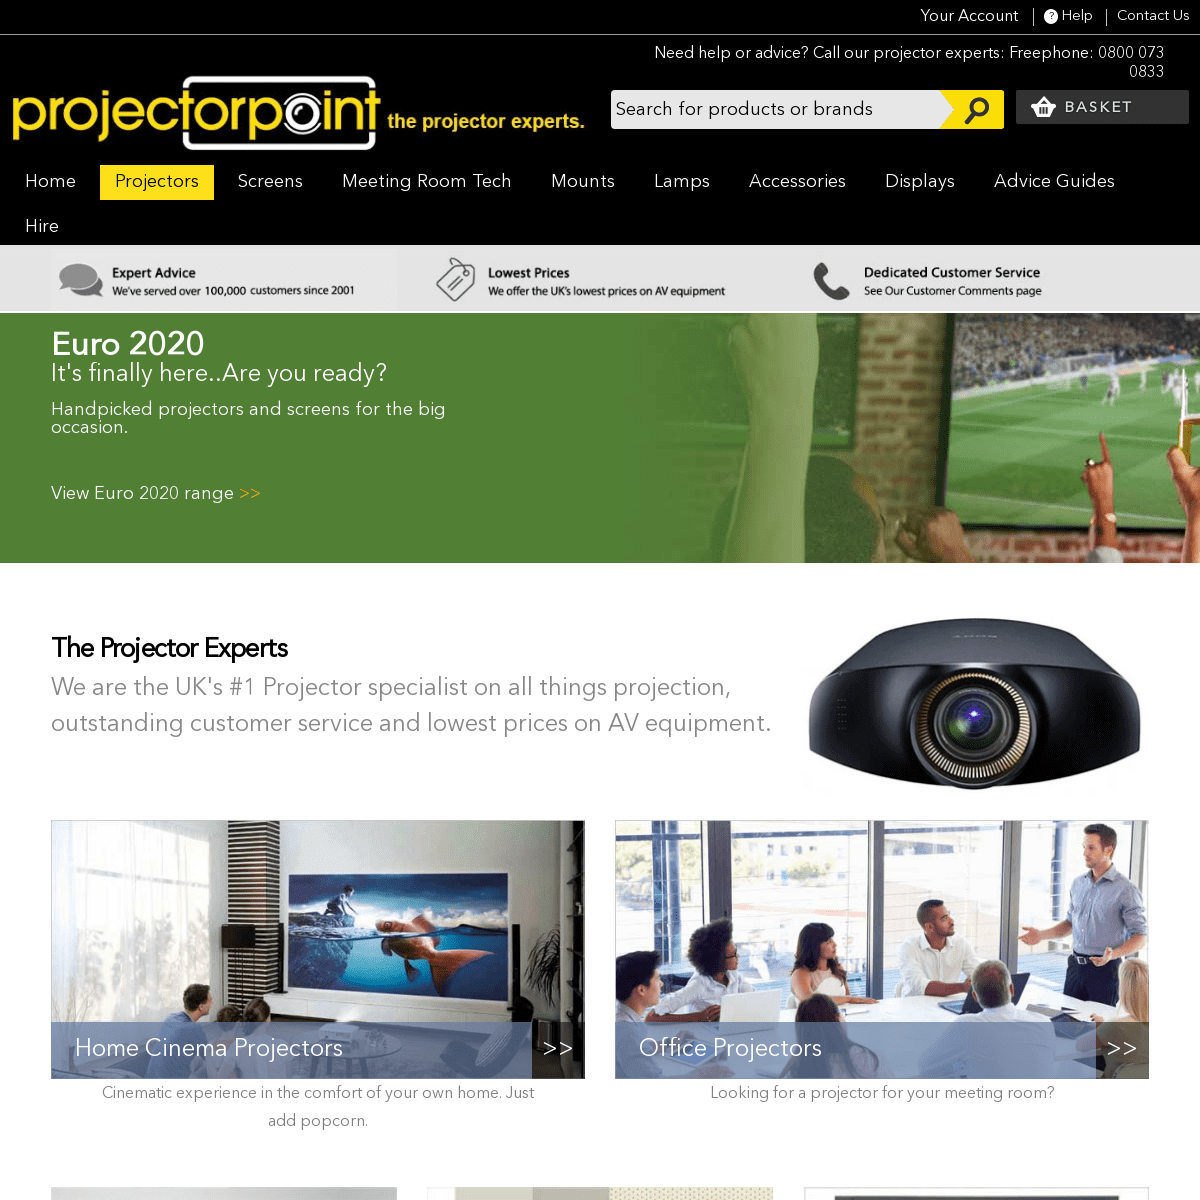 A complete backup of https://projectorpoint.co.uk